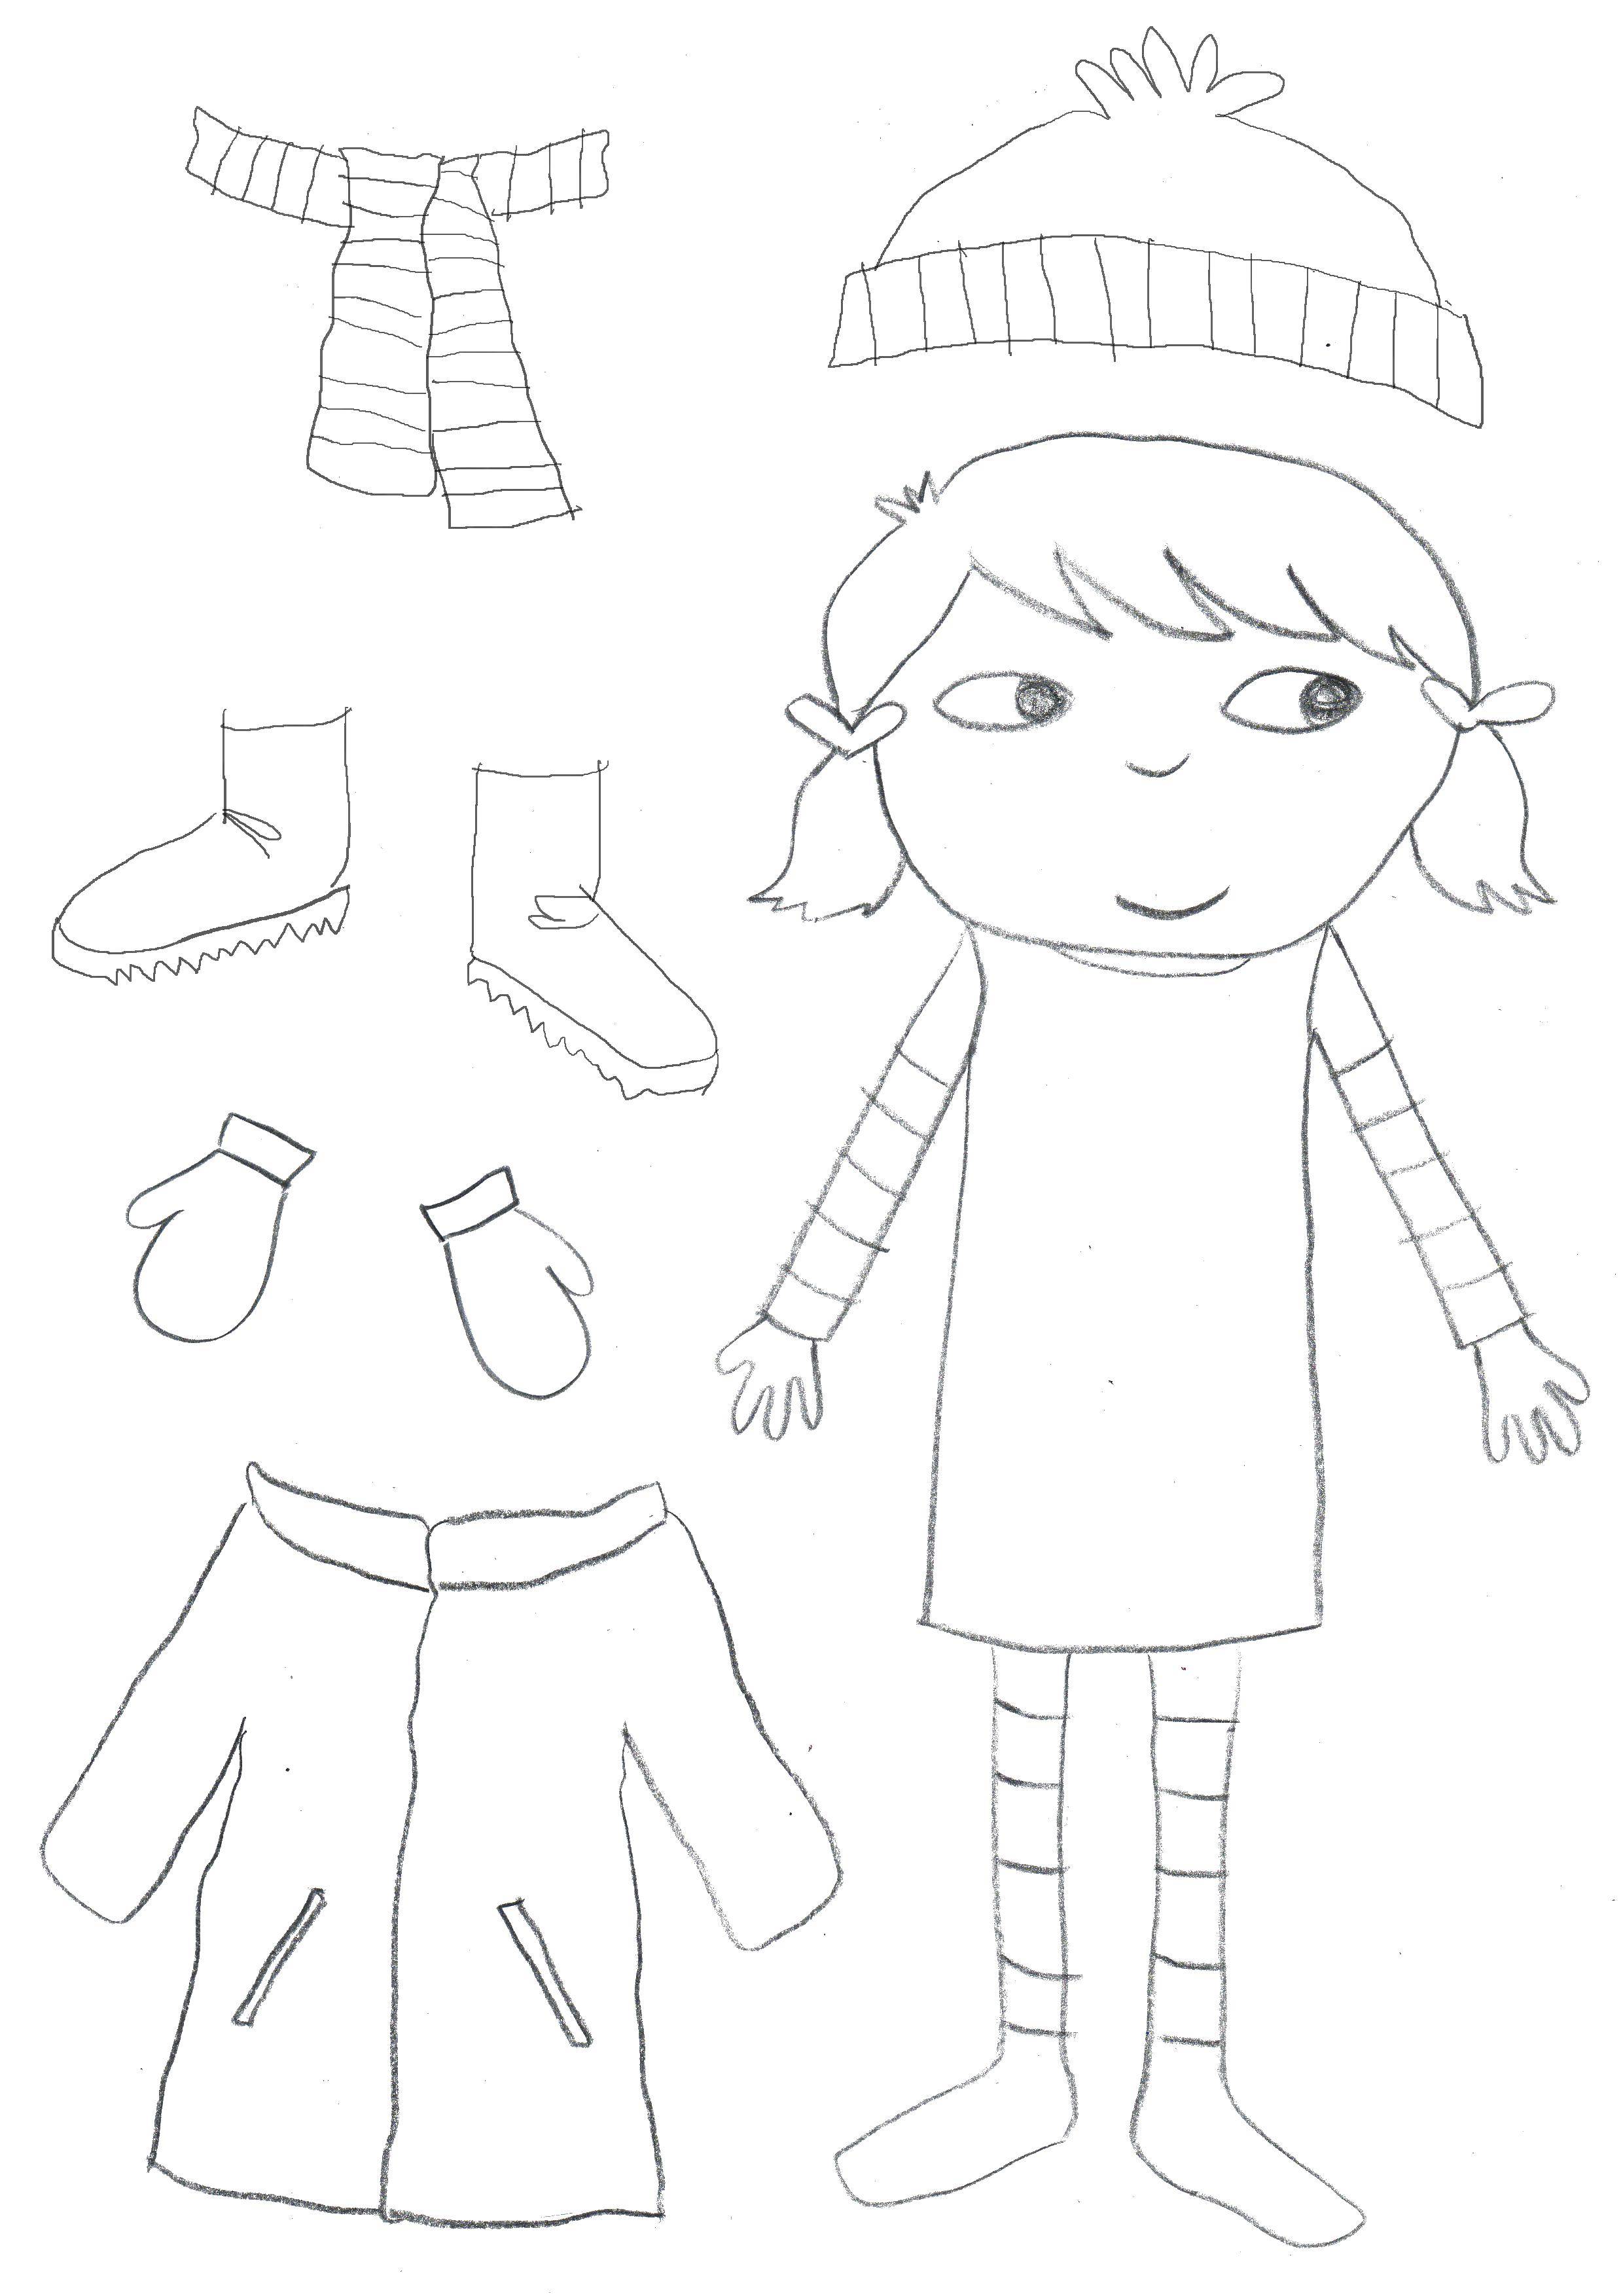 Coloring Girl, scarf, hat, uggs, mittens, jacket. Category clothing. Tags:  Girl, scarf, hat, uggs, mittens, jacket.